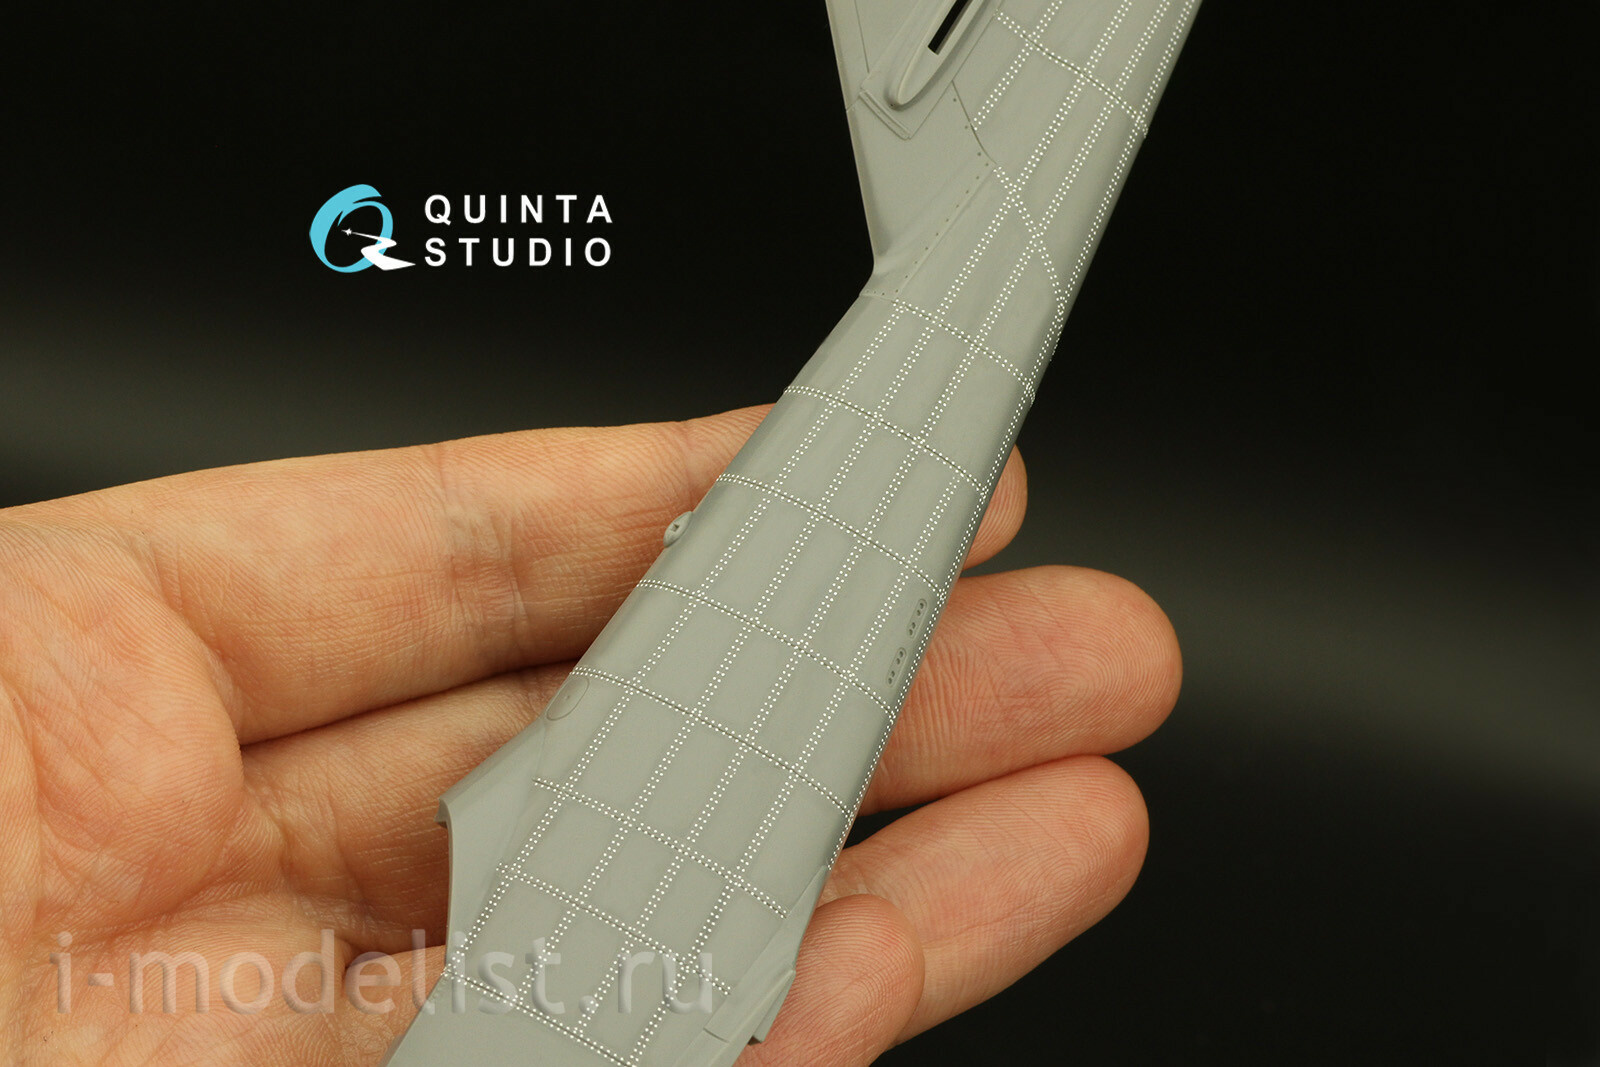 QRV-025 Quinta Studio 1/32 Double riveting rows (riveting size 0.20 mm, interval 0.8 mm), white, total length 5.8 m